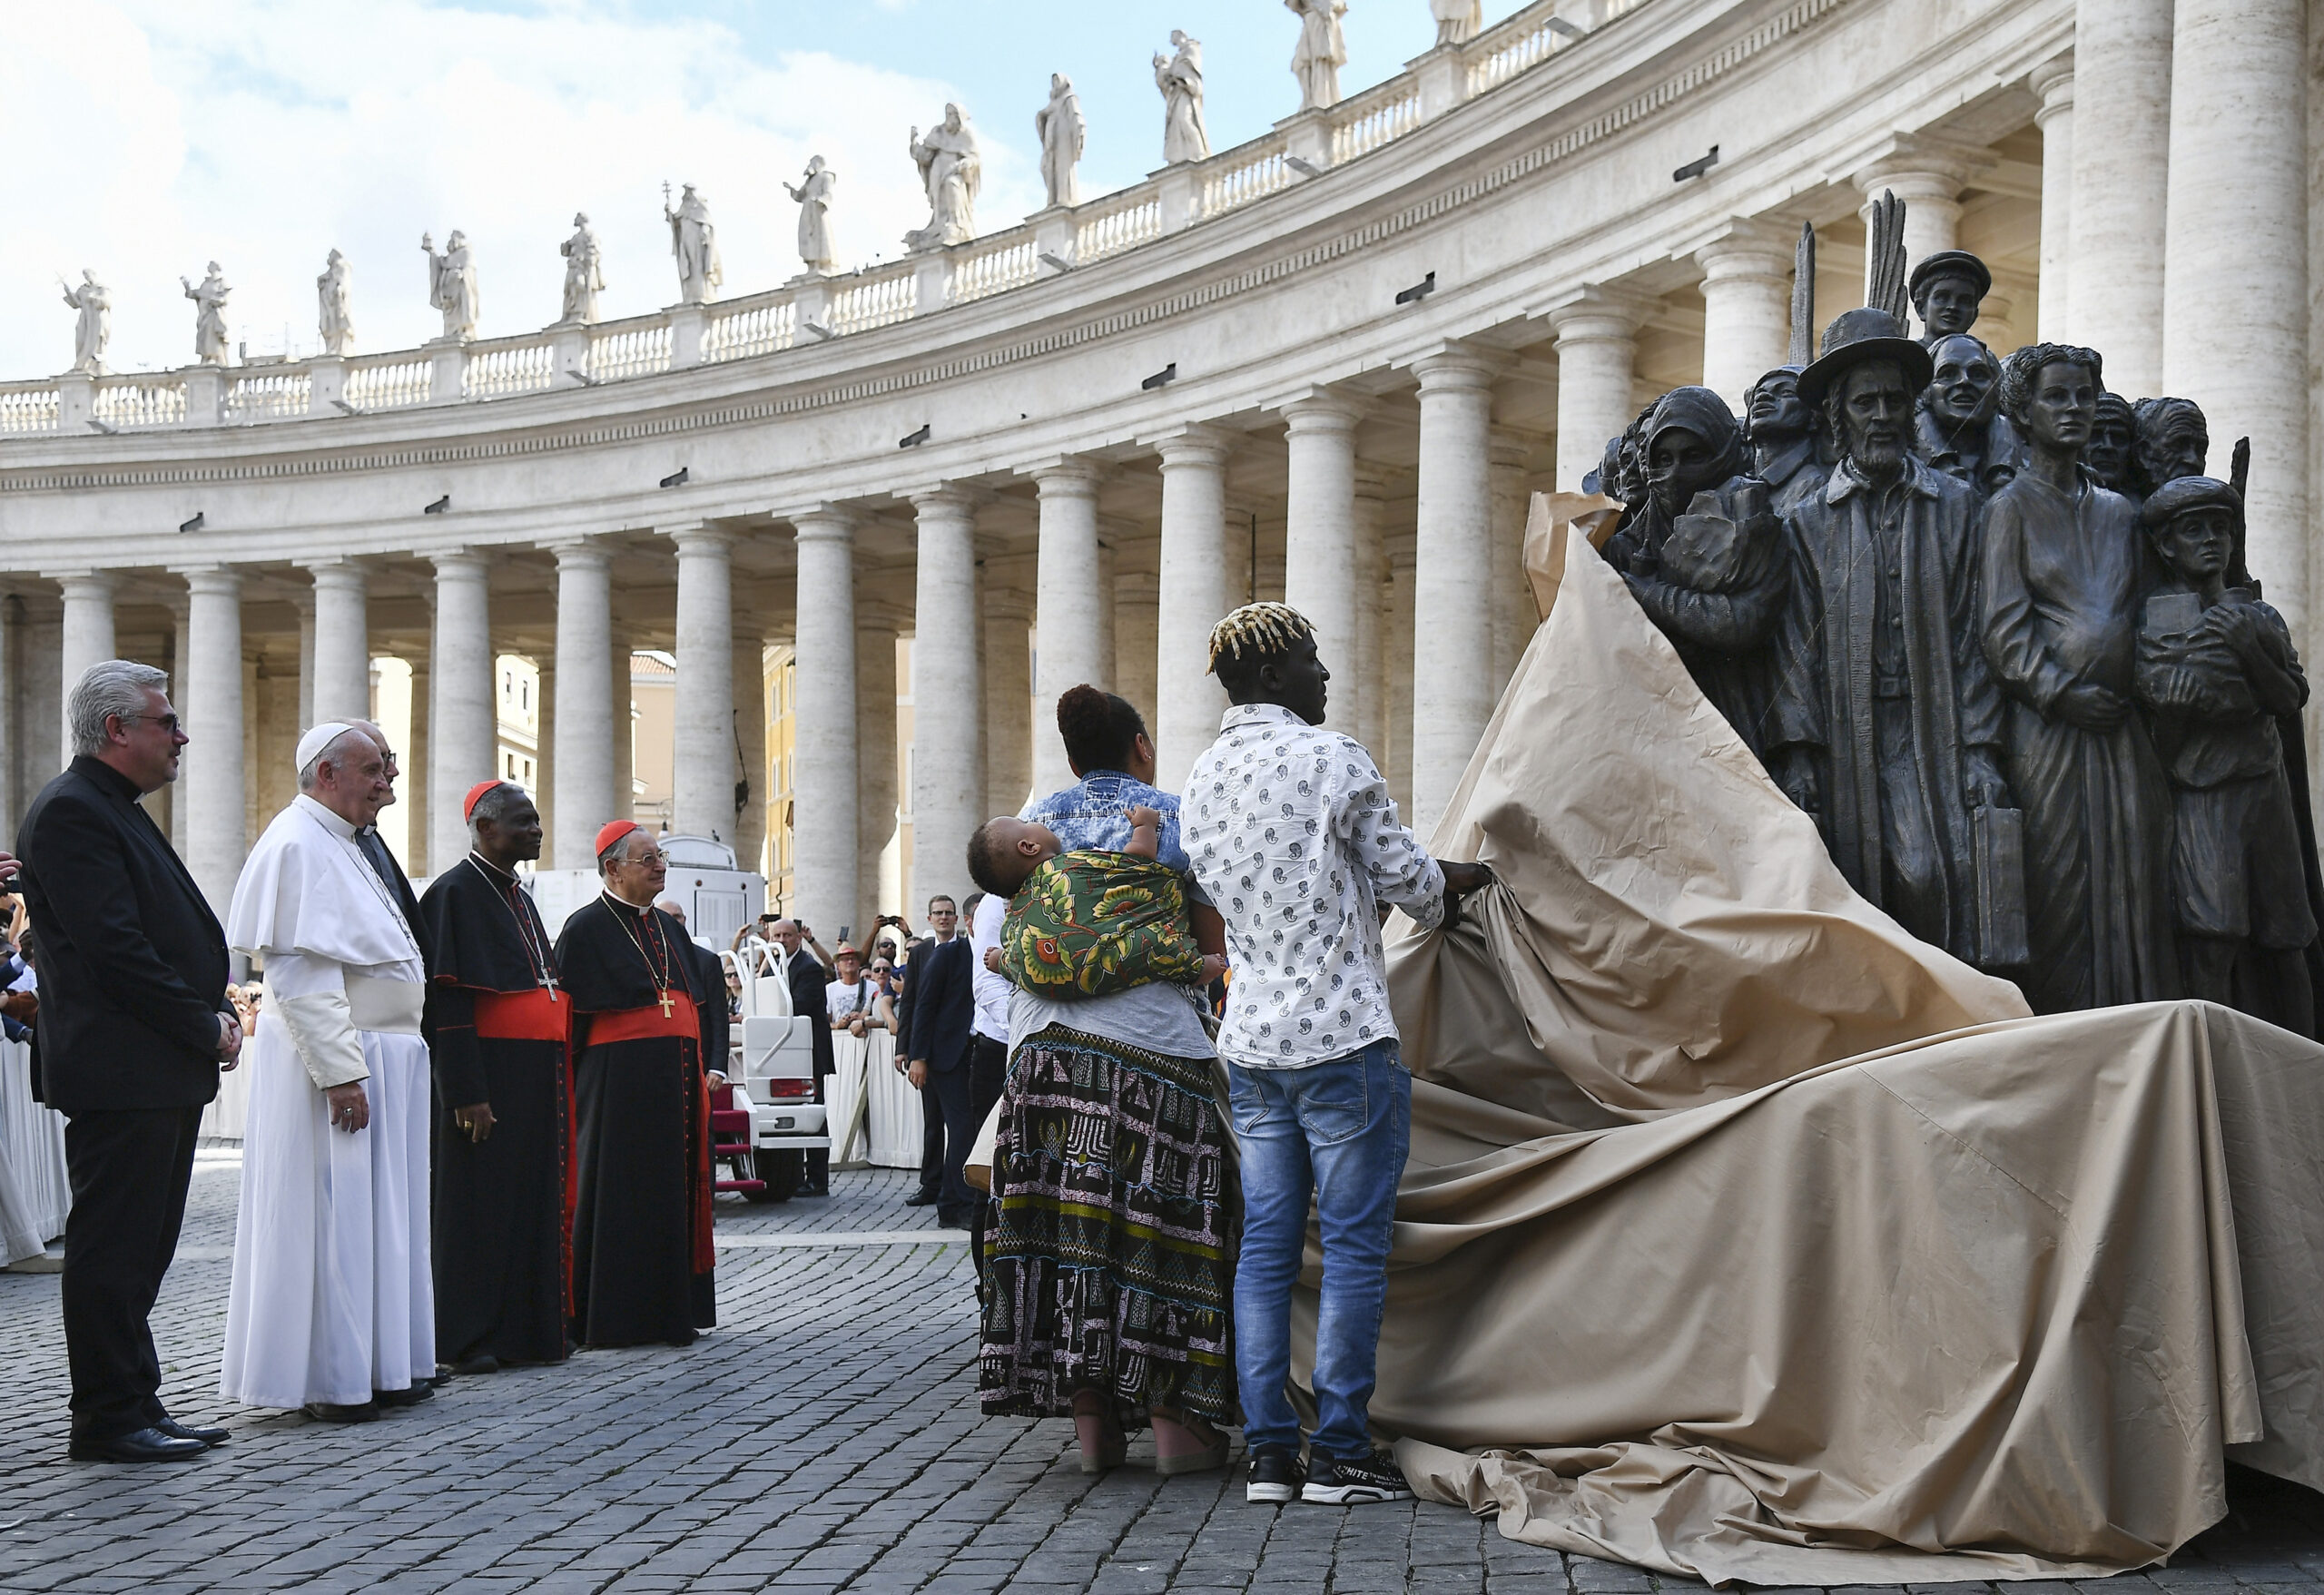 Pope Francis, left, watches the unveiling of the new sculpture "Angels Unawares" on the occasion of the Migrant and Refugee World Day, in St. Peter's Square, at the Vatican, on Sept. 29, 2019. (Vincenzo Pinto/Pool Photo via AP)